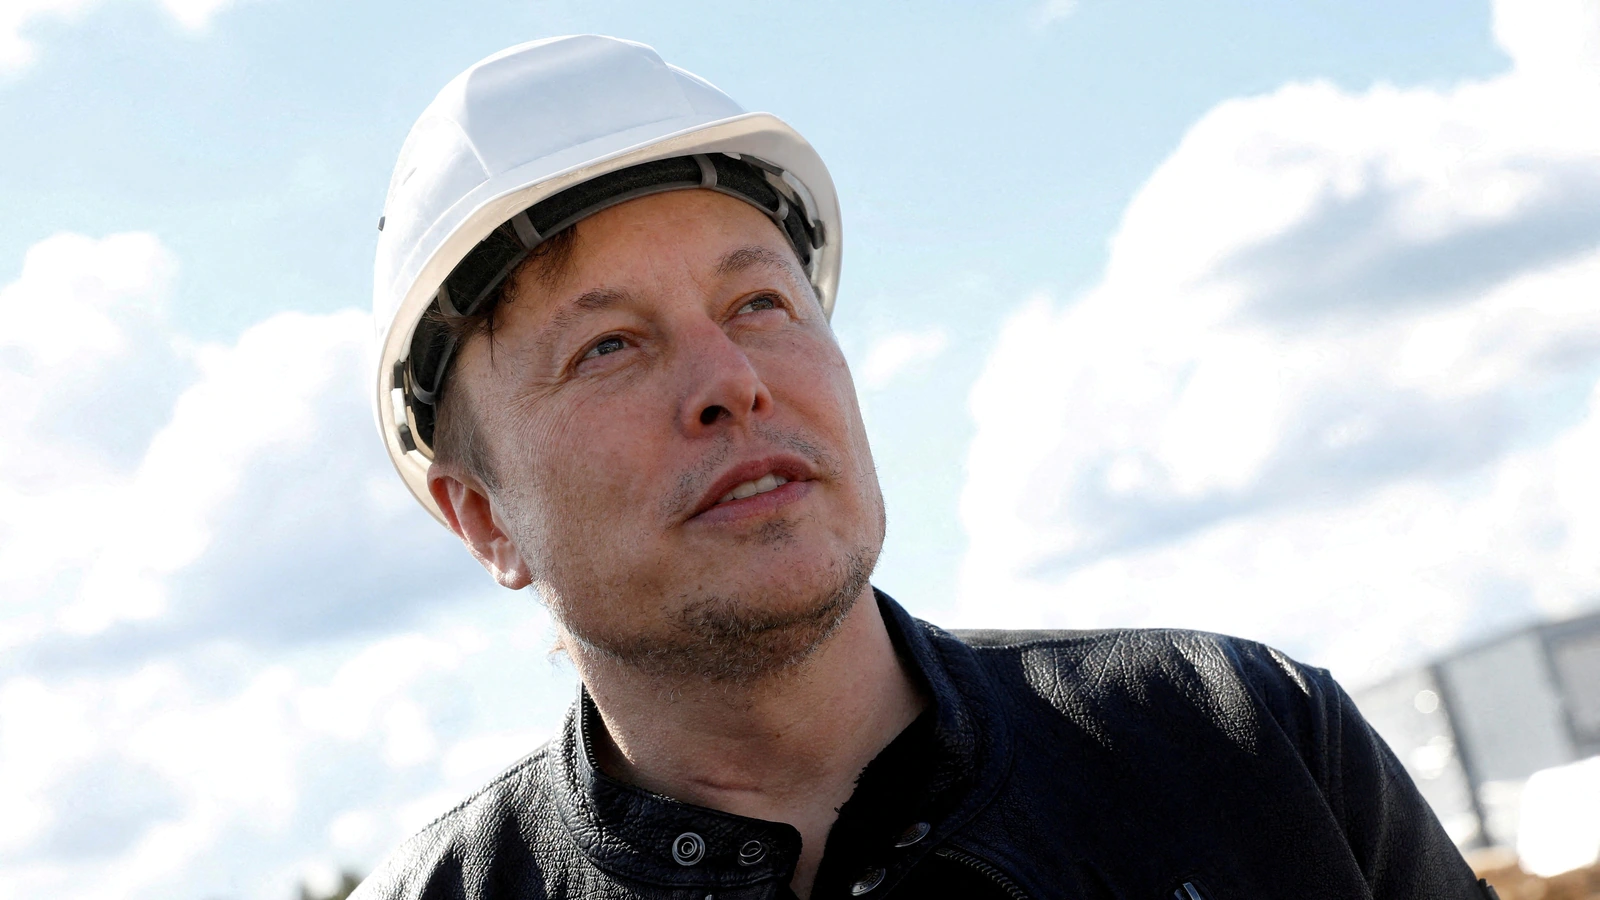 ‘Hate to say this’: Elon Musk, CEO of clean energy firm Tesla, calls for increase in oil, gas output